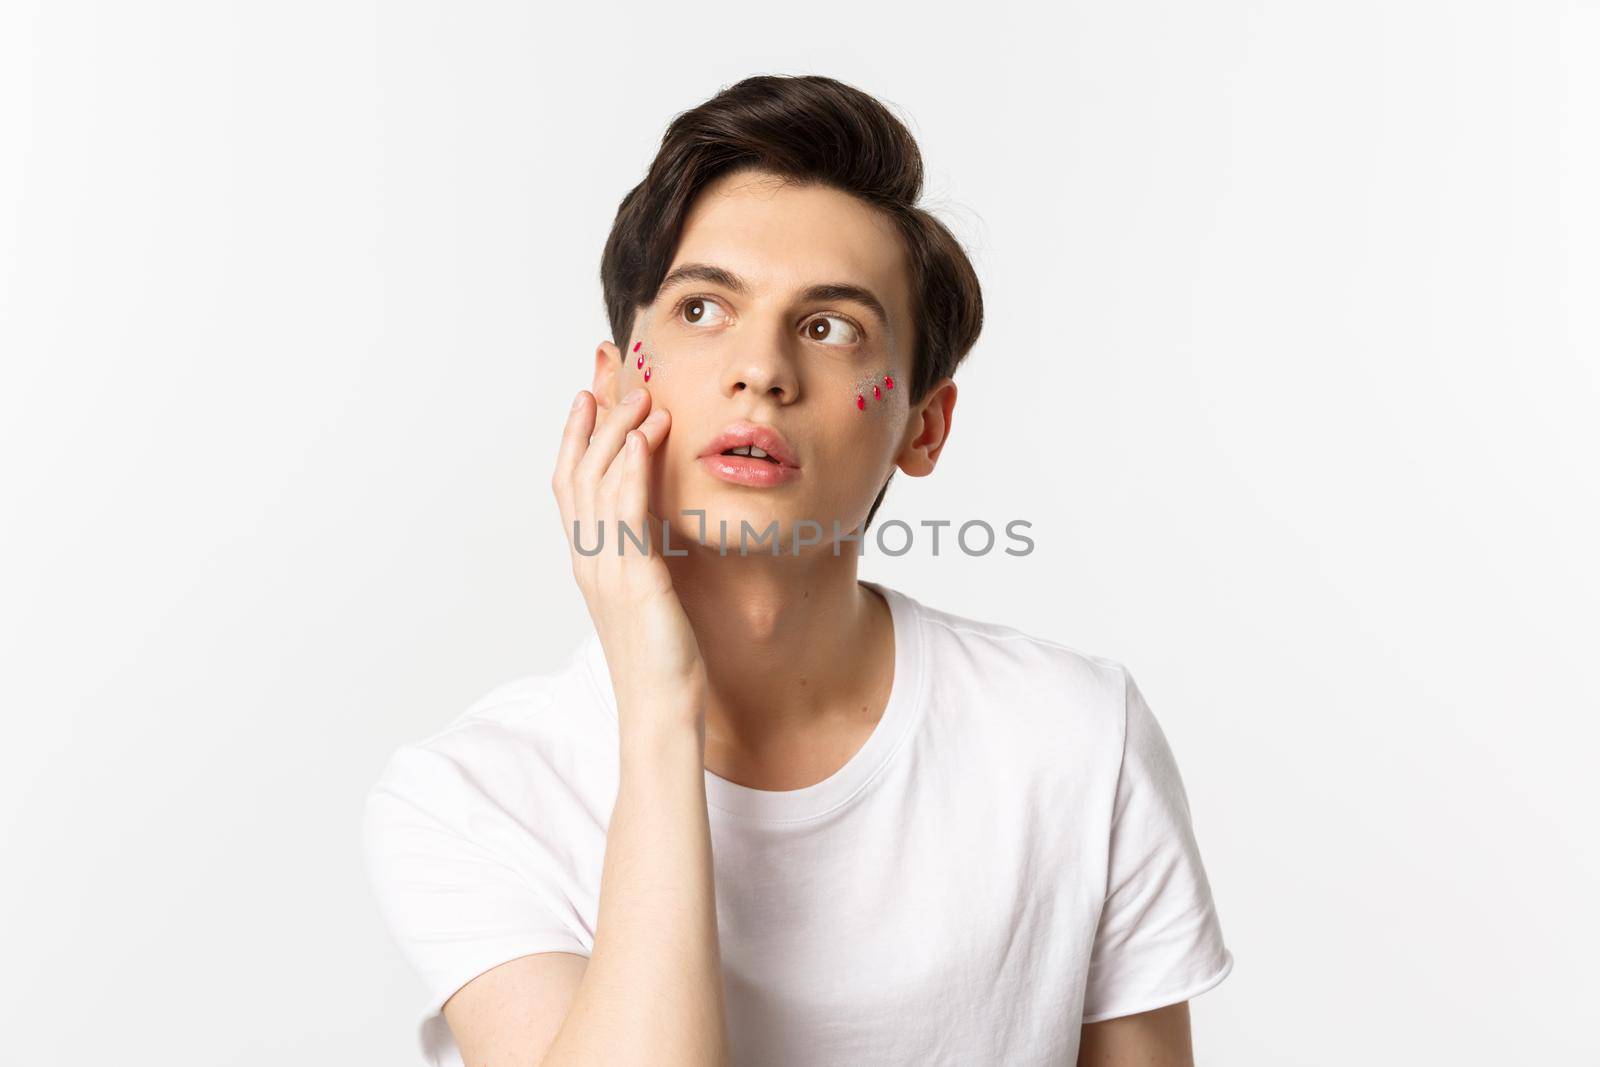 People, lgbtq community and lifestyle concept. Beautiful young gay man applying glitter under eyes for pride party, standing over white background.